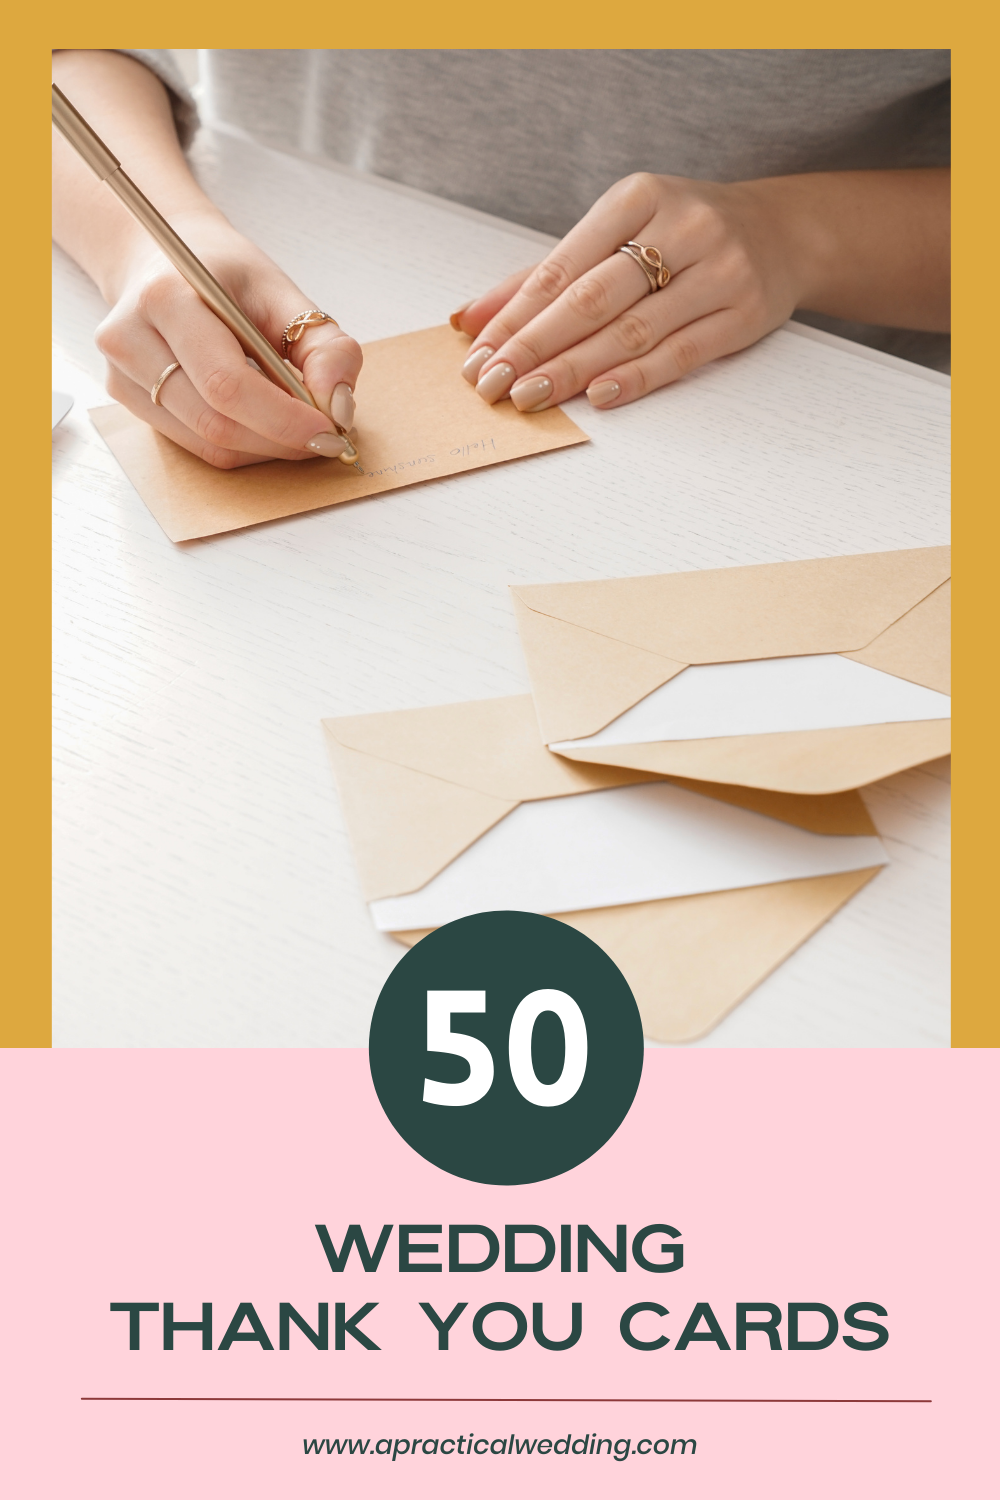 Wedding Thank You Cards You’ll Want To Send